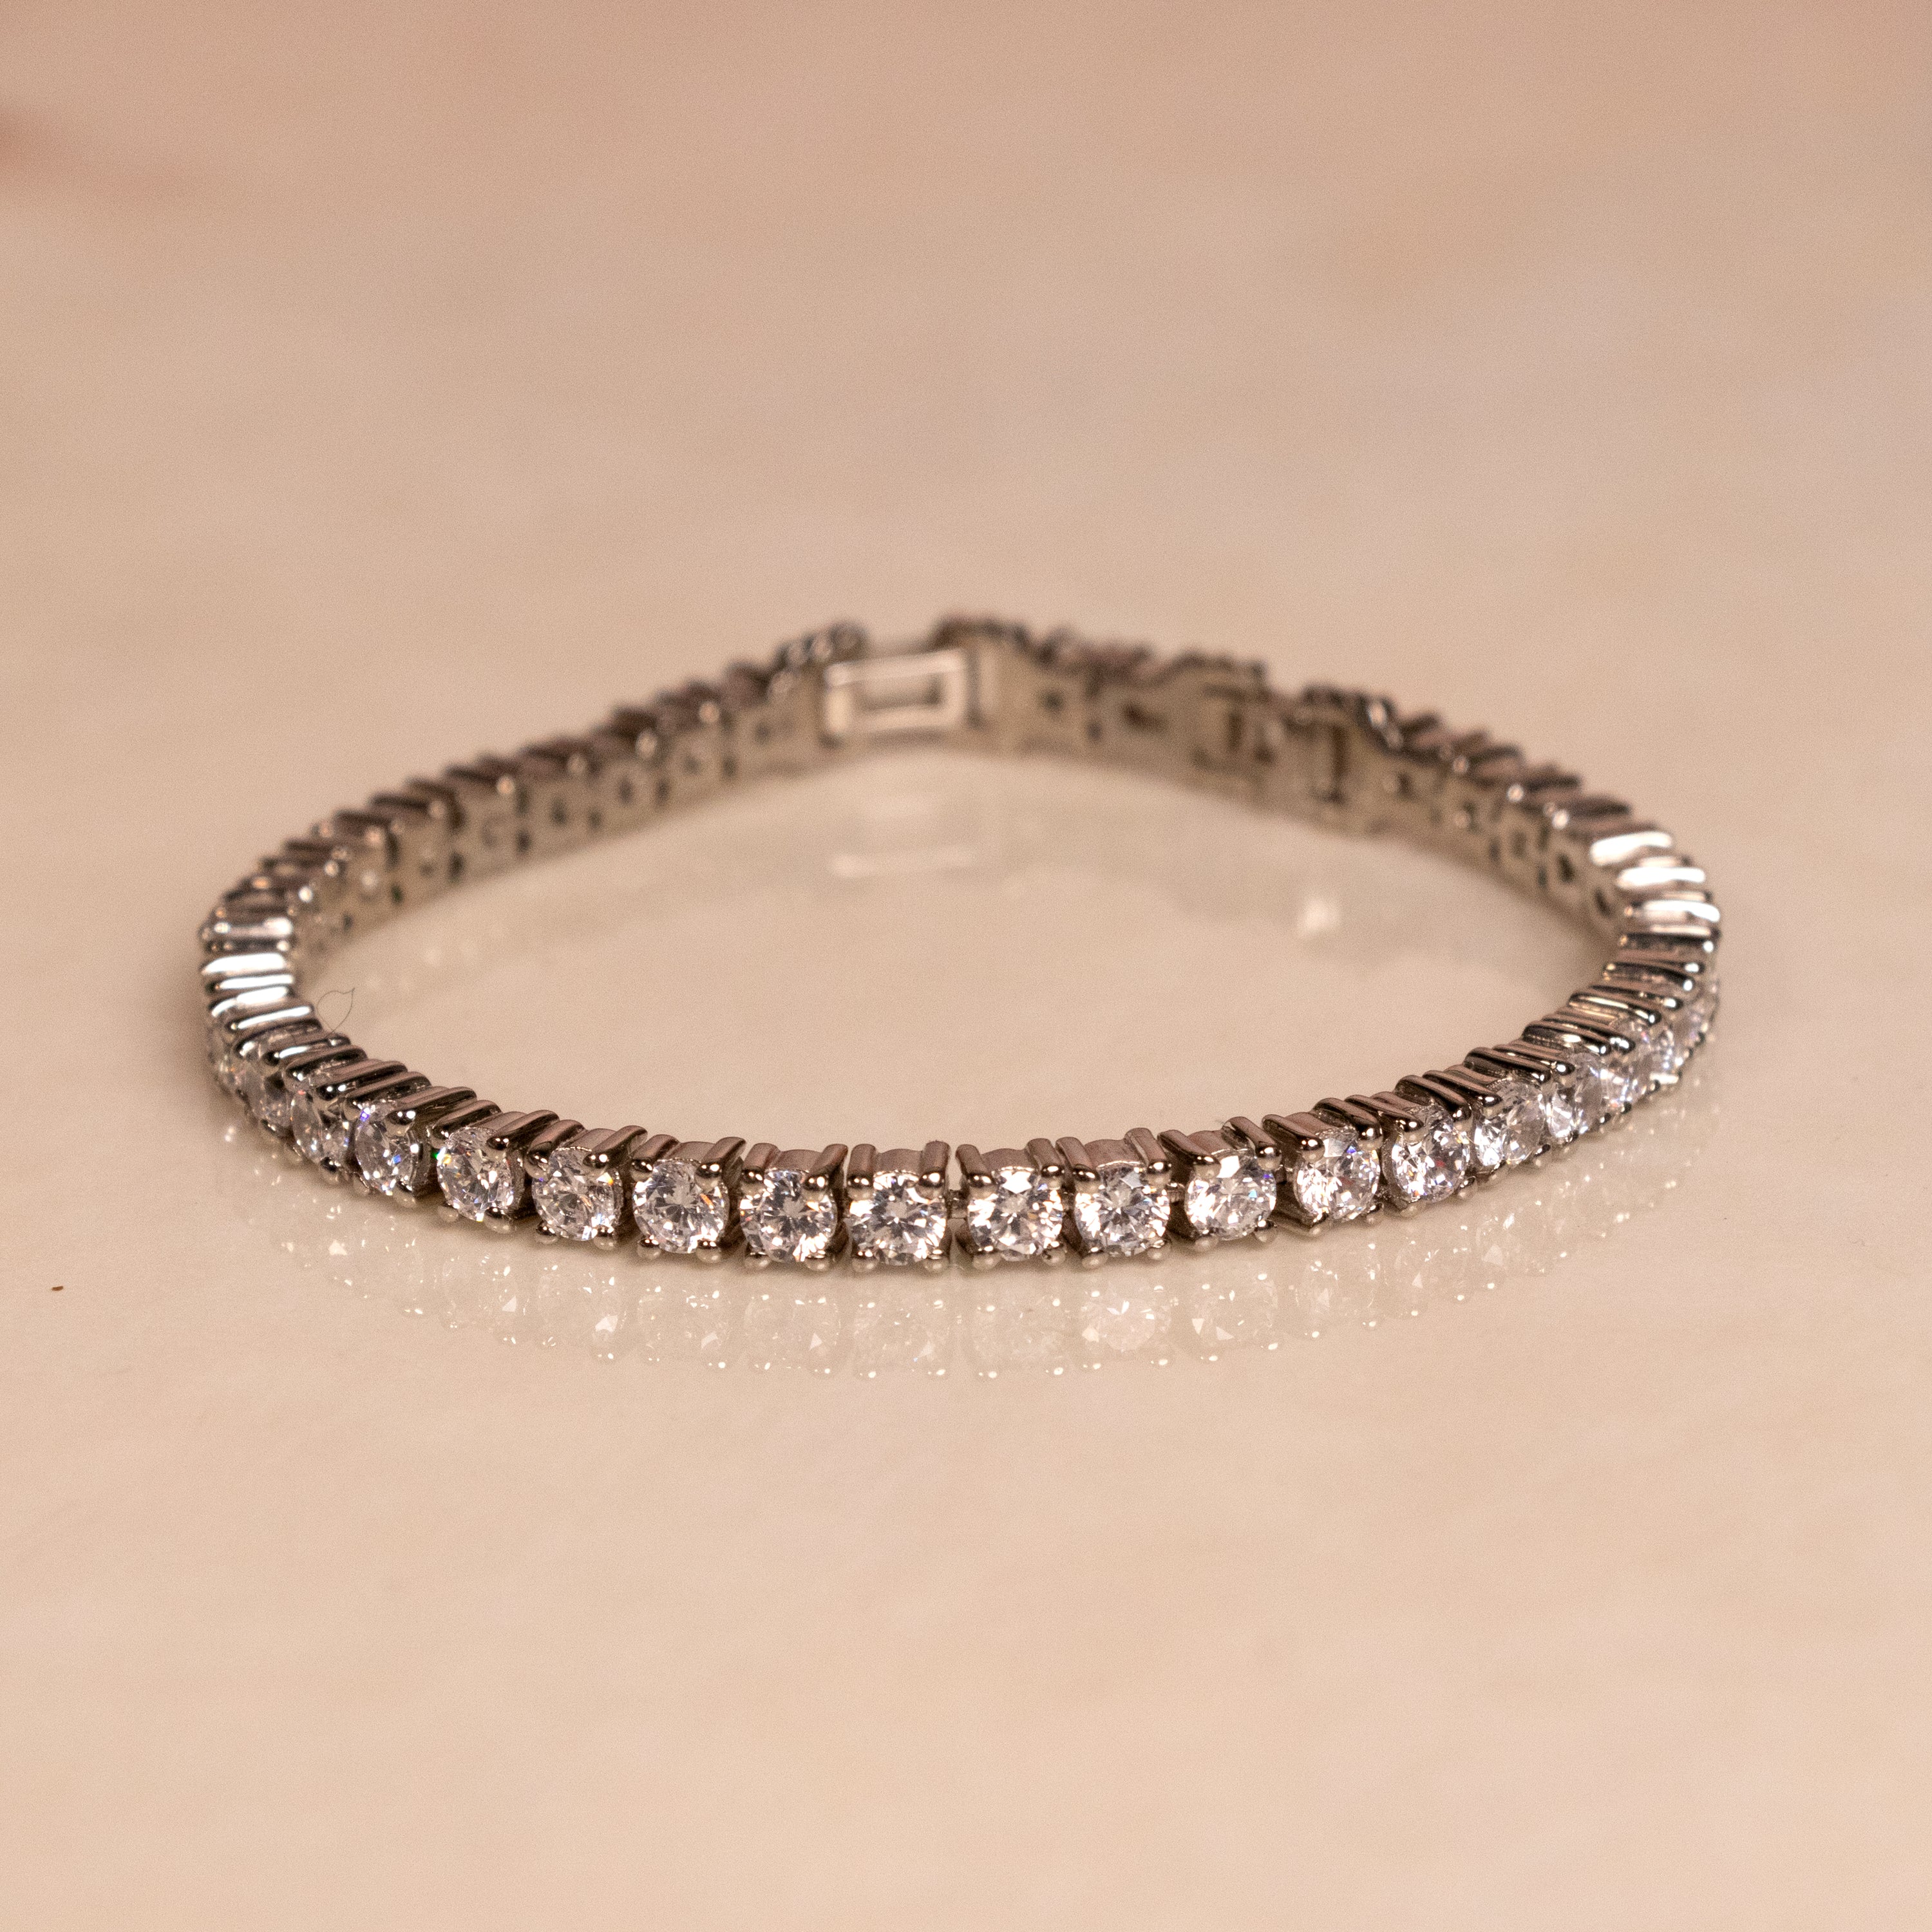 Elevate your style with our stunning collection of 925 sterling silver bracelets!